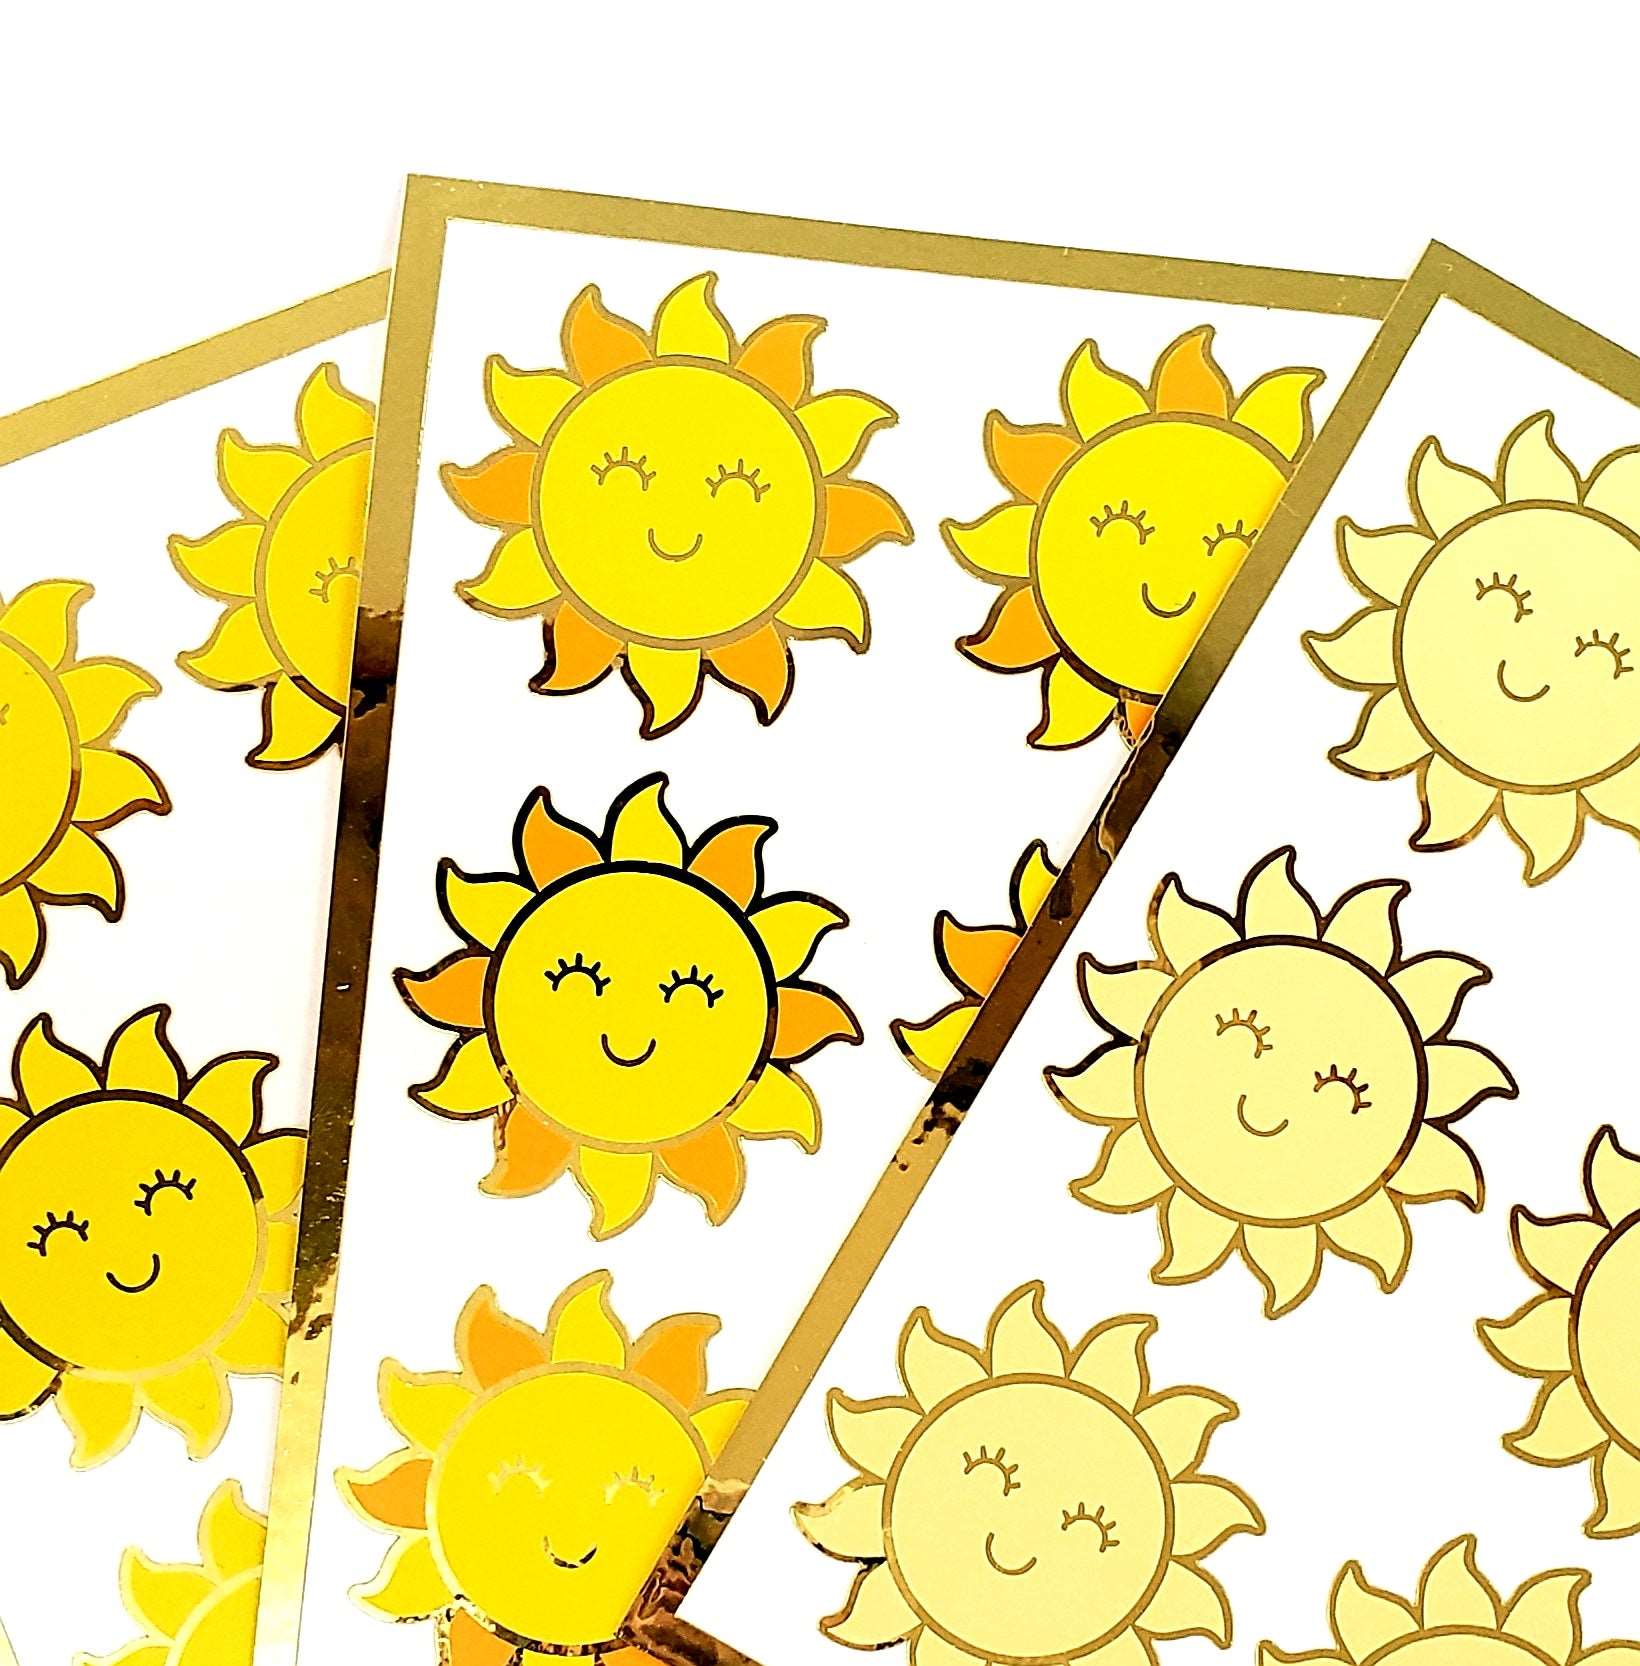 Smiling Happy Sun Stickers, set of 6 bright yellow and gold vinyl stickers